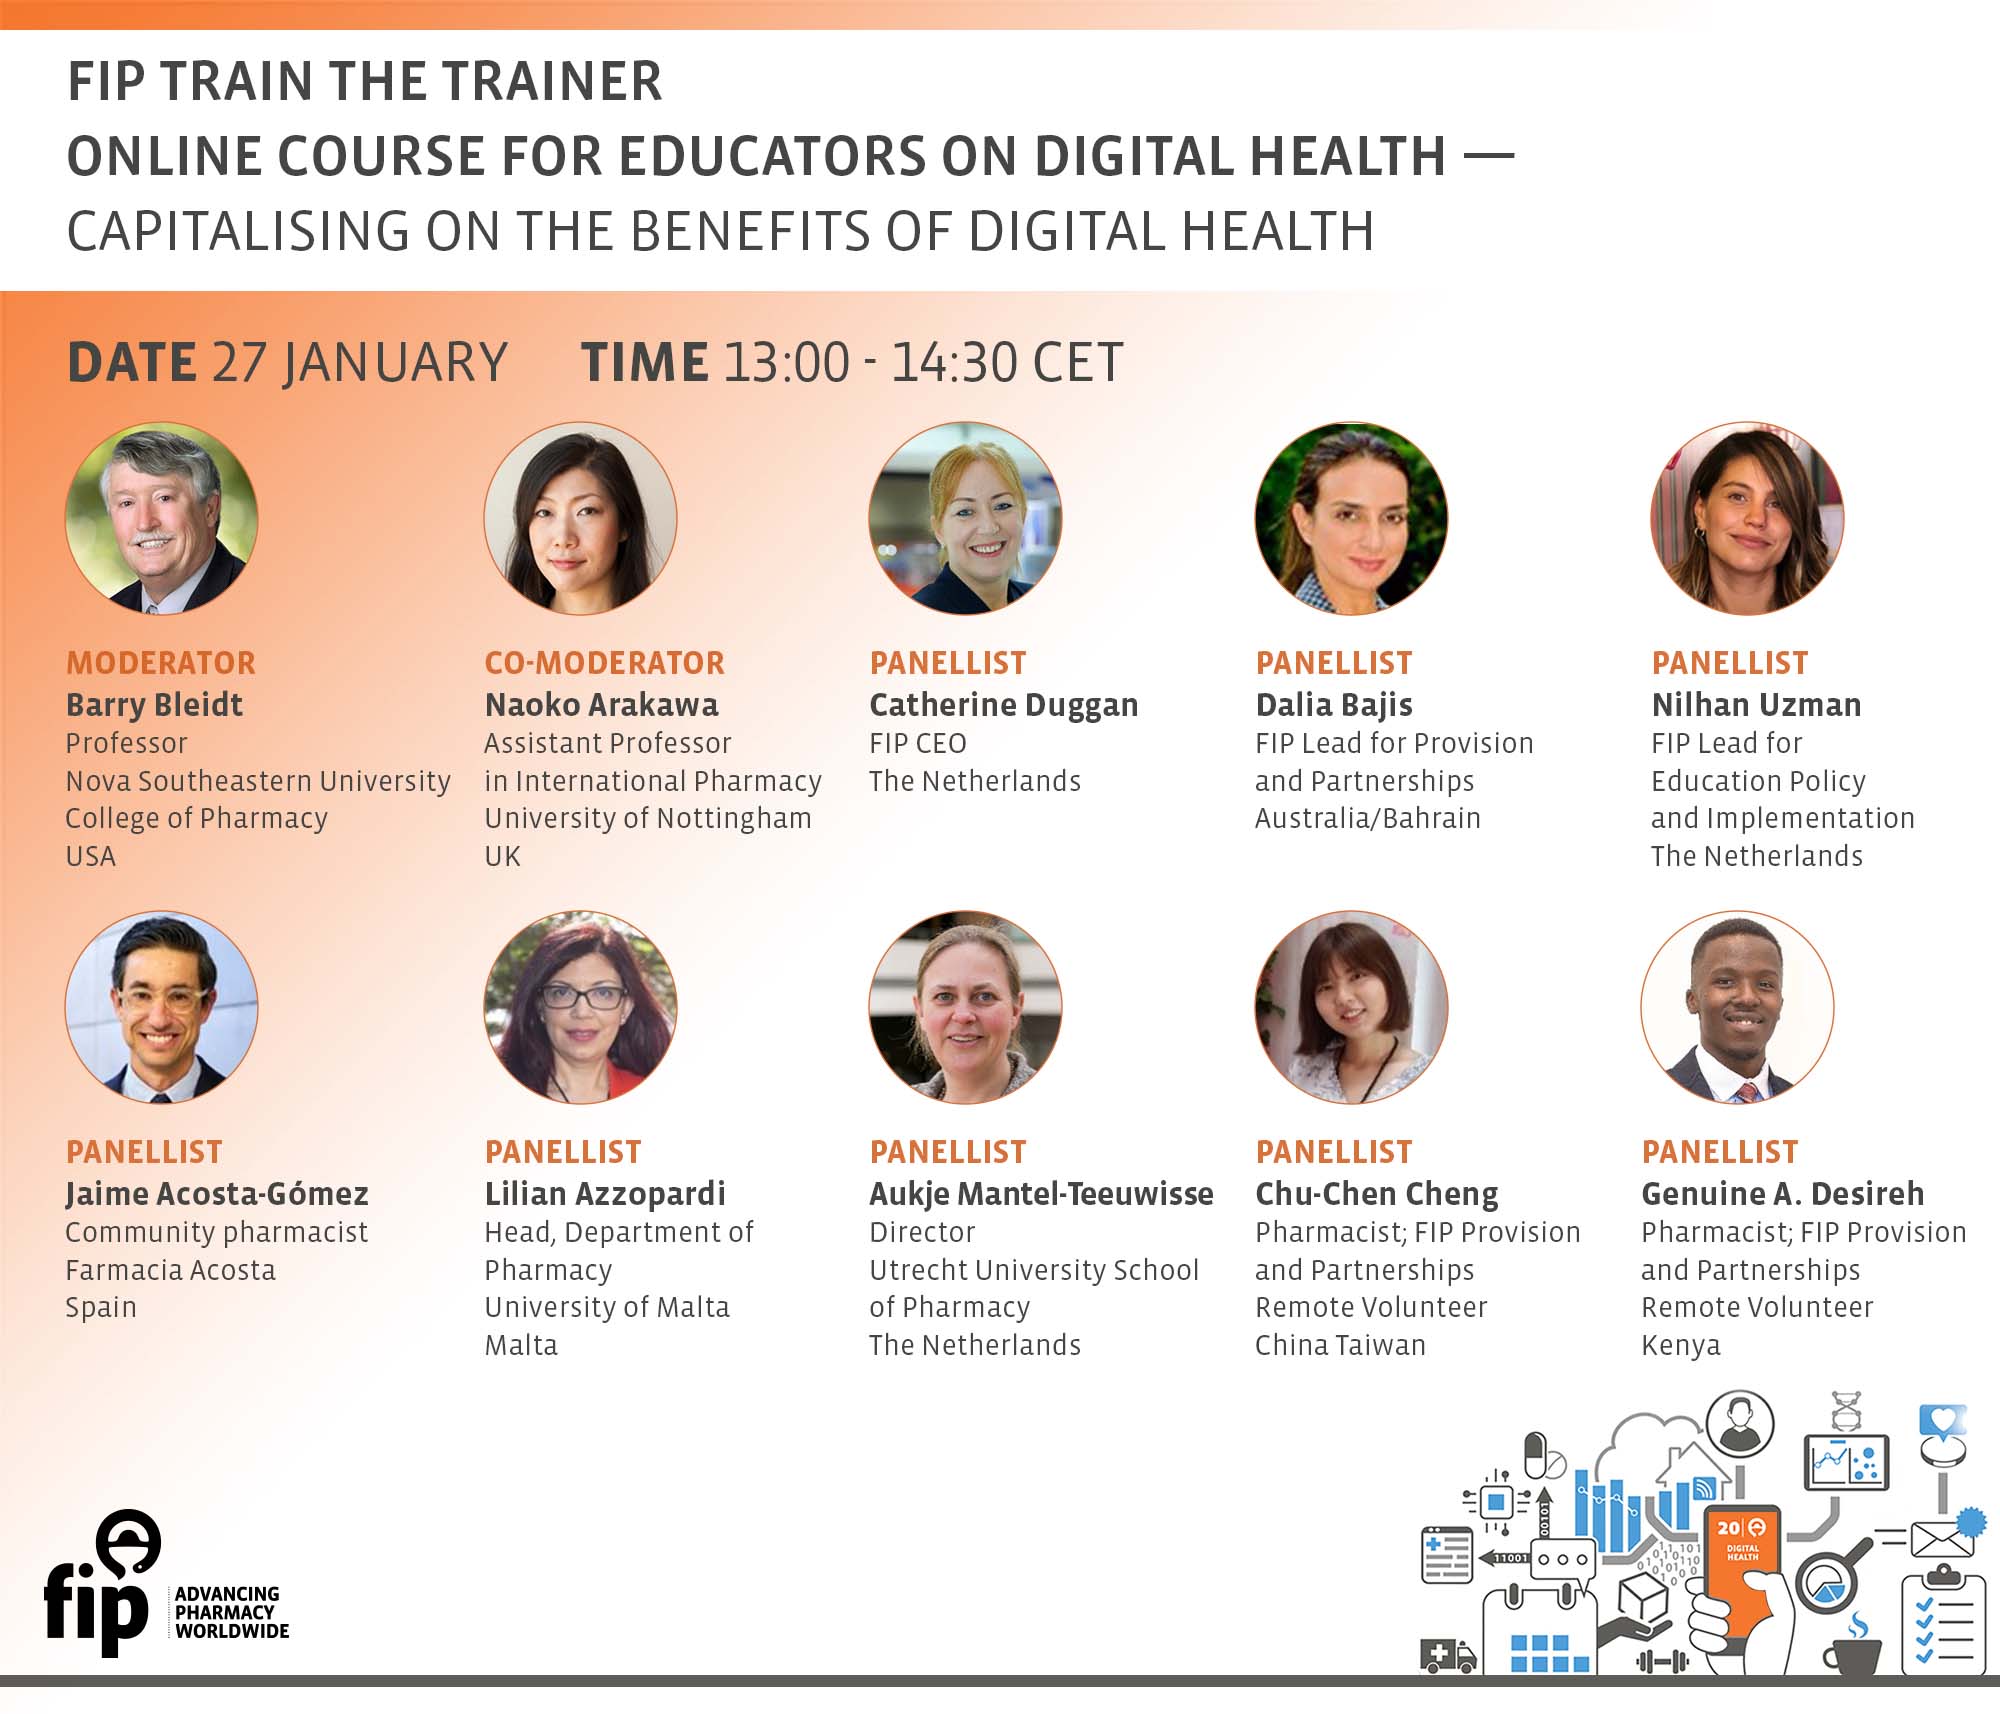 FIP Train the Trainer online course for educators on digital health - Capitalizing on the benefits of digital health Thumbnail